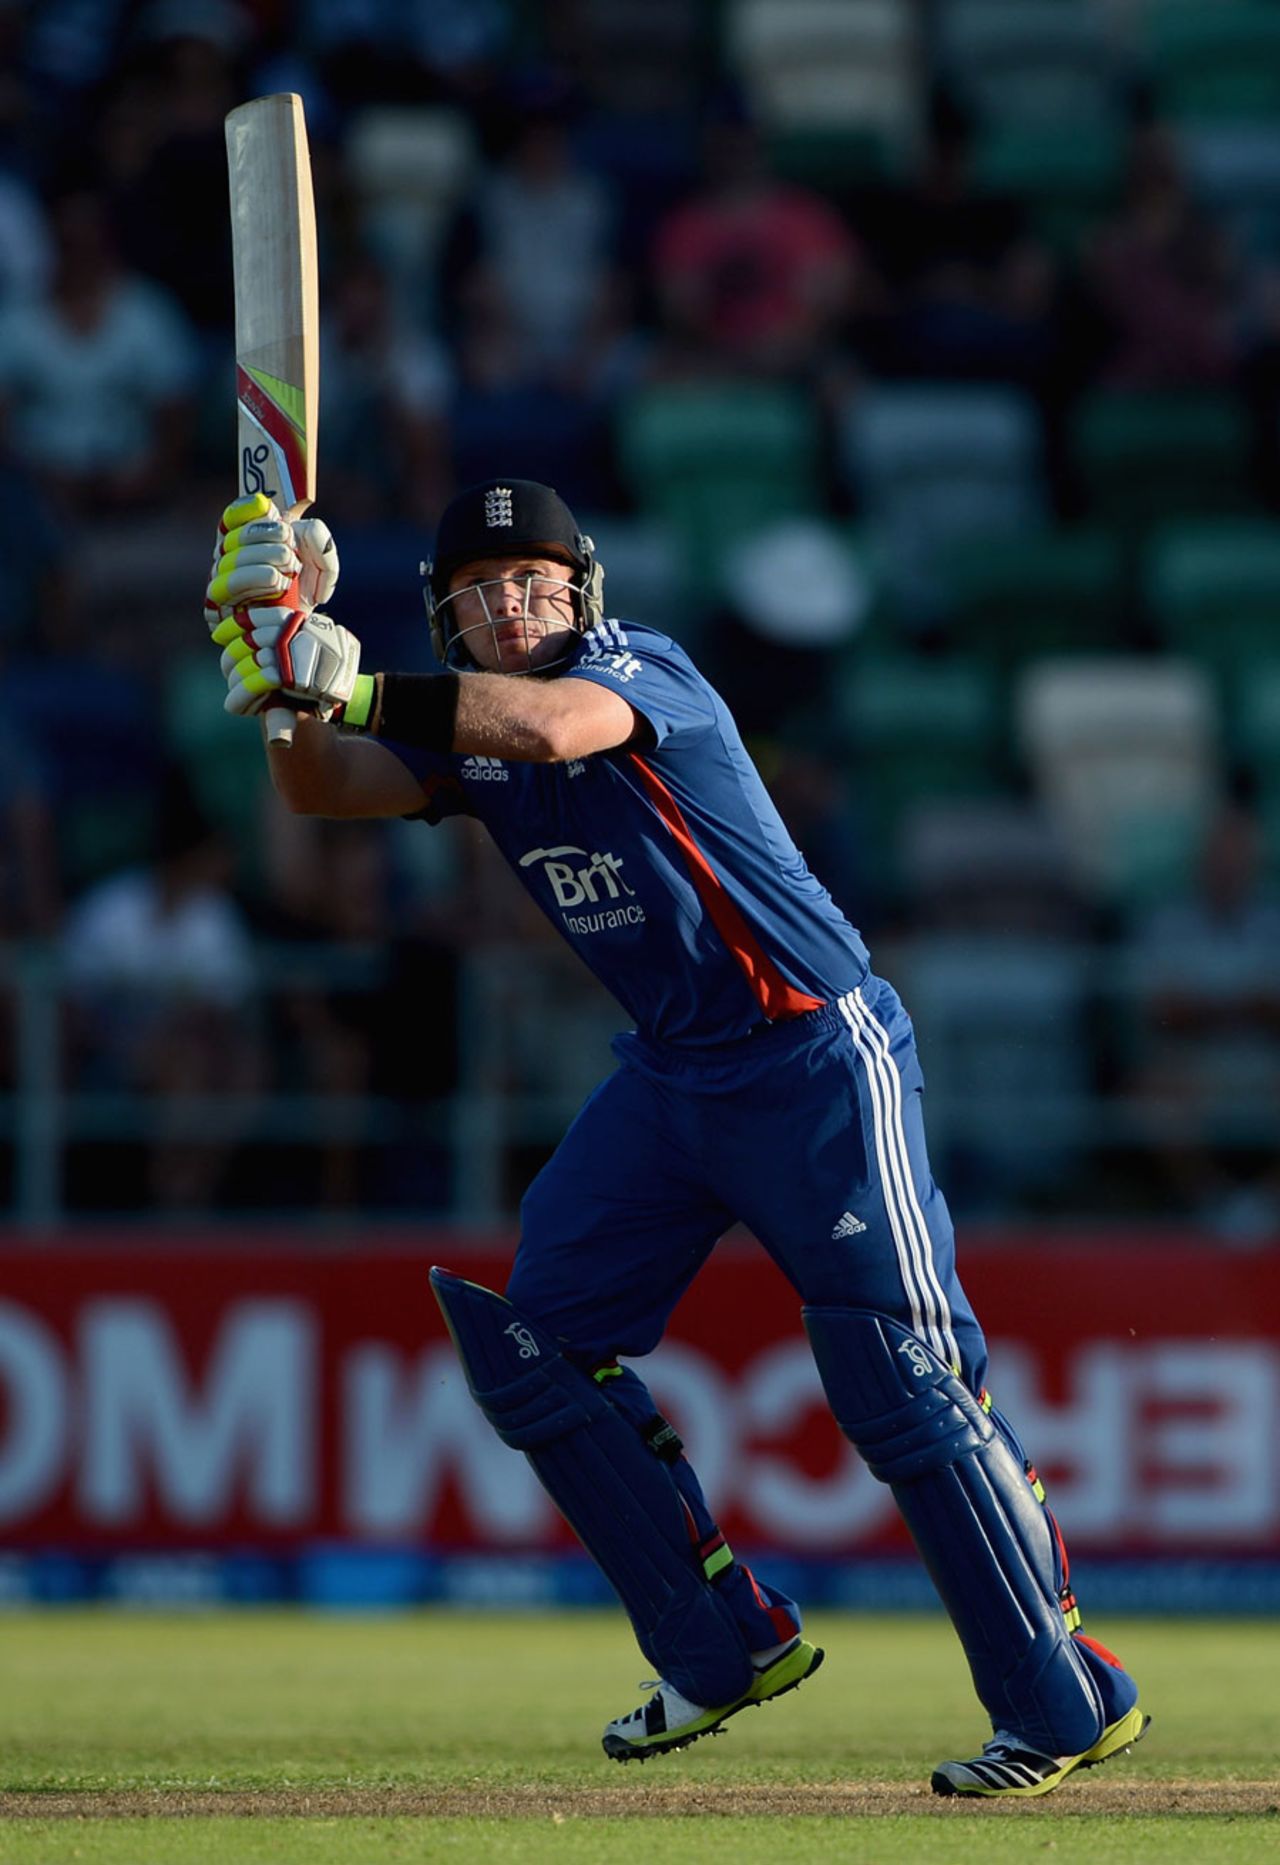 Ian Bell made 44 before being caught on the boundary, New Zealand v England, 2nd ODI, Napier, February 20, 2013